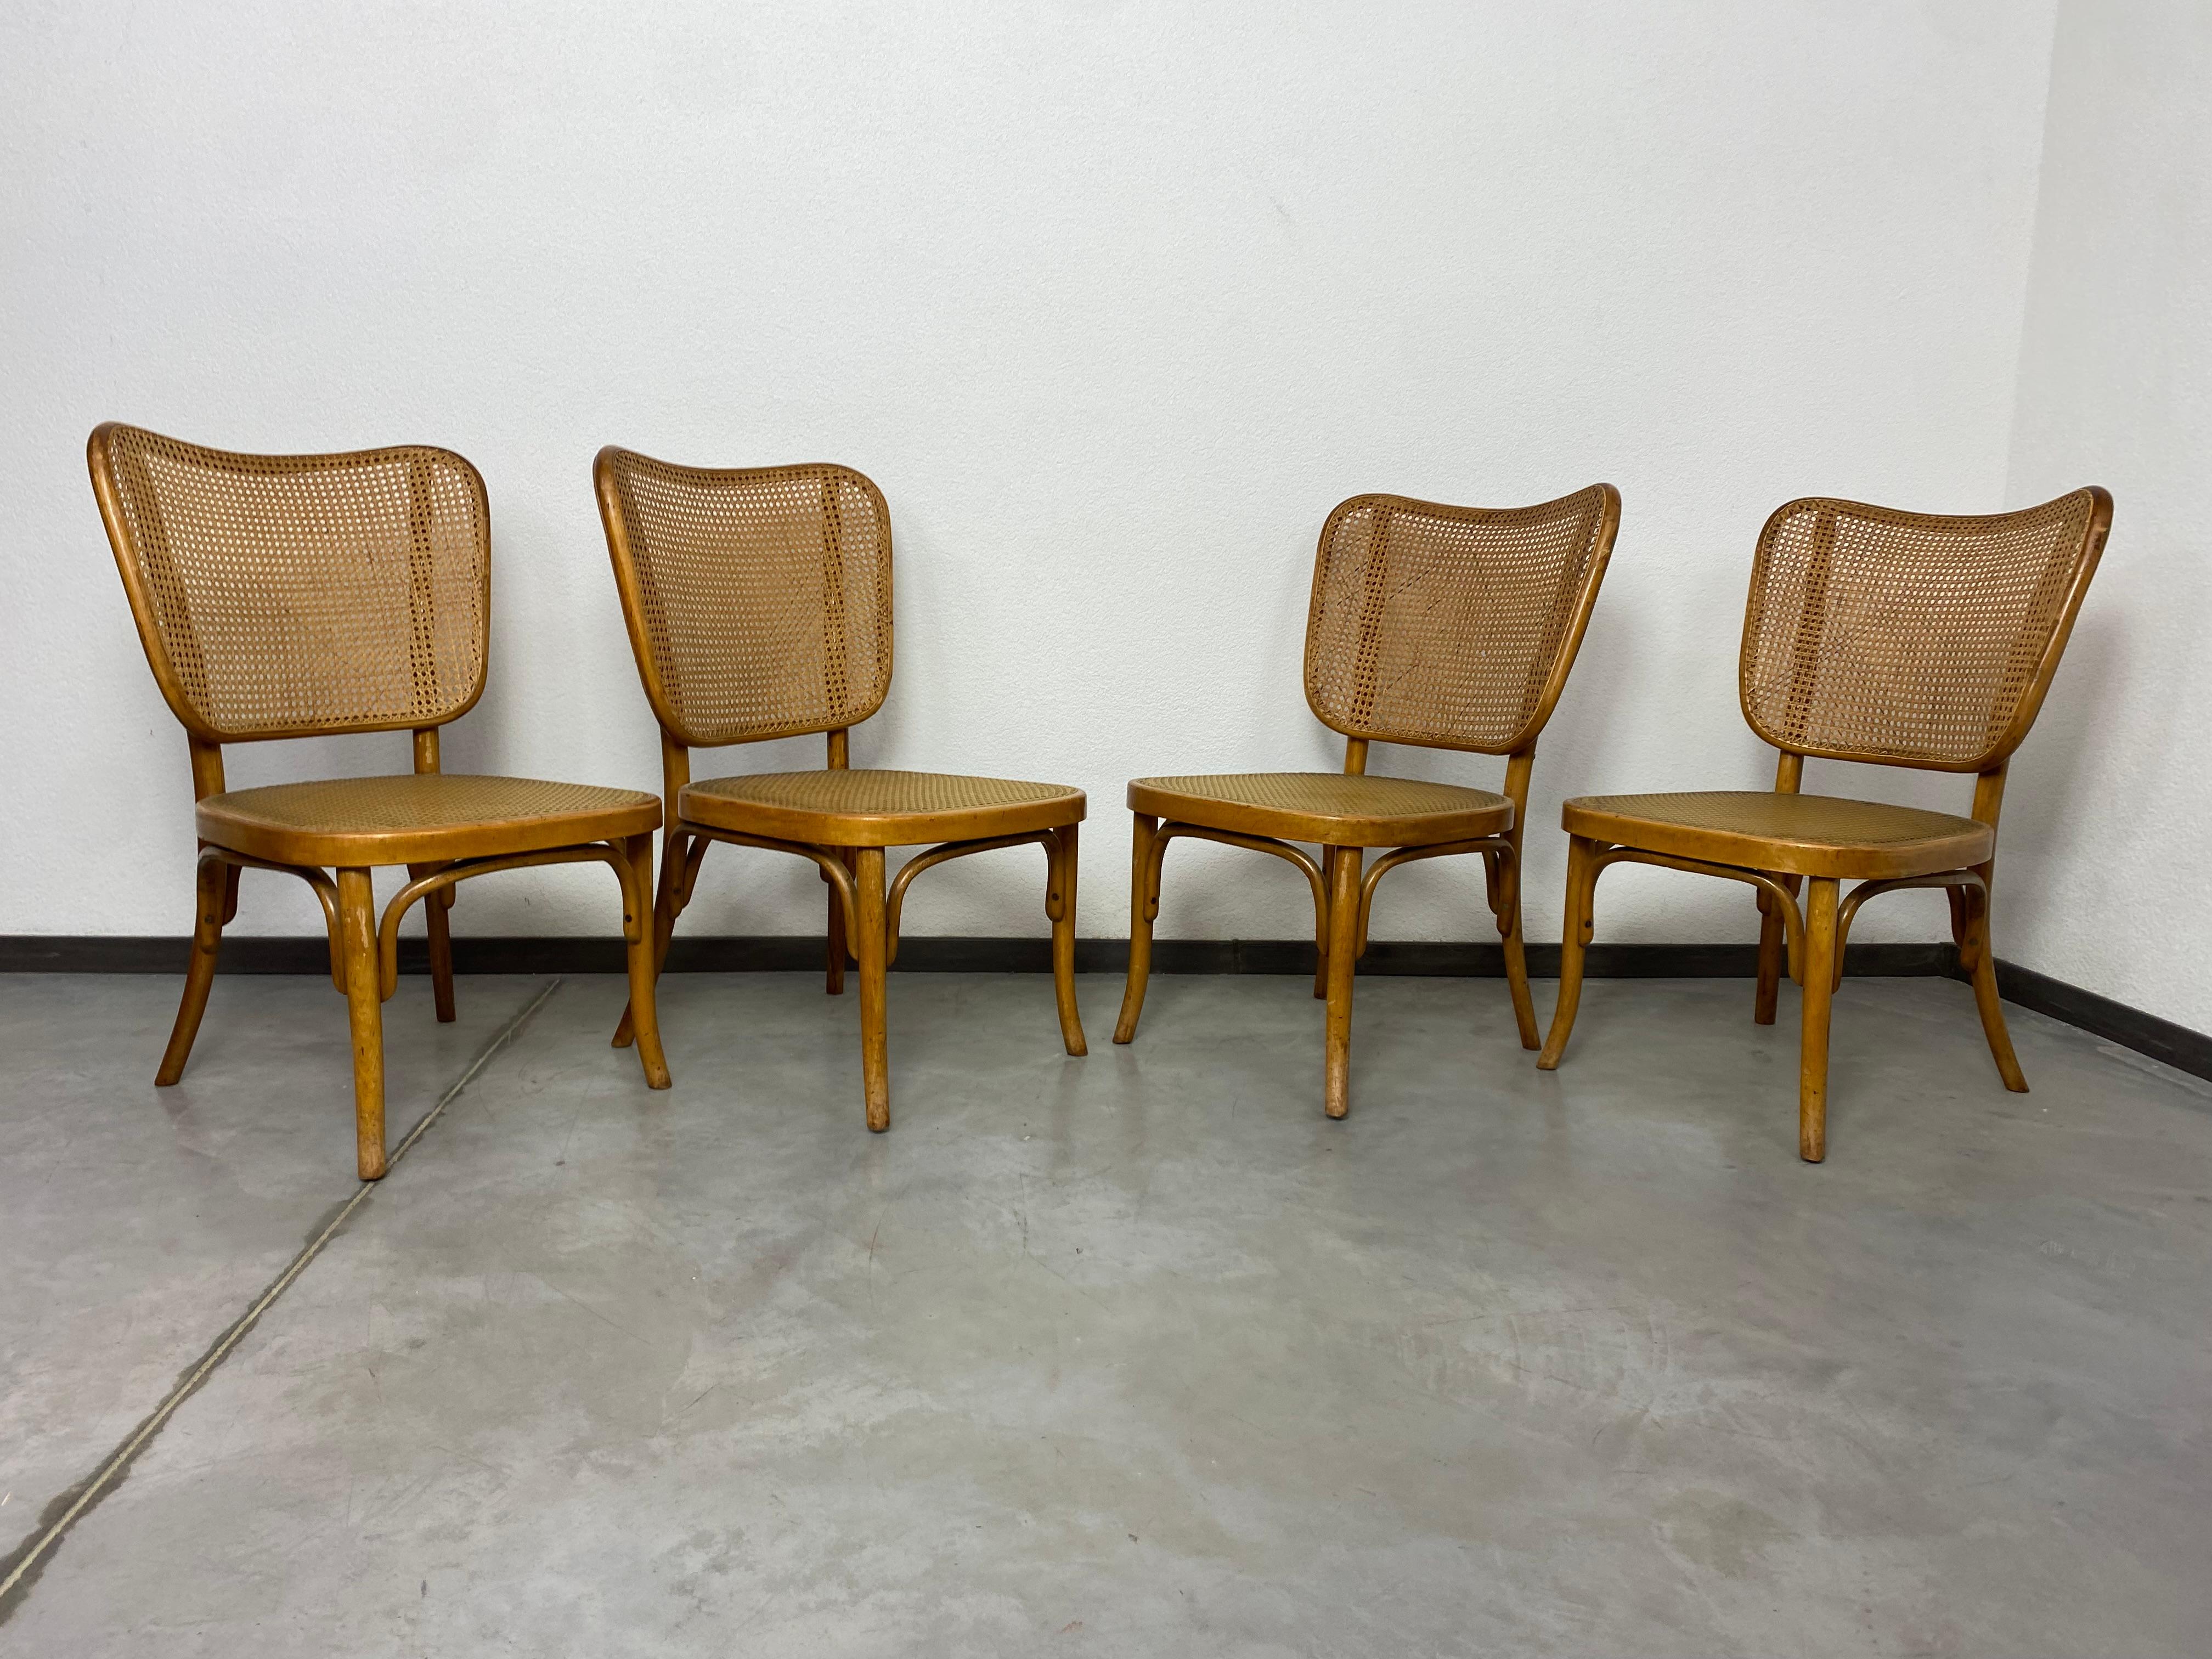 Set of 4 chairs model A821 by Adolf Gustav Schneck for Thonet Mundus. Absolutely original condition, combination of natural rattan weave on the backrest and rubber weave on the seat.